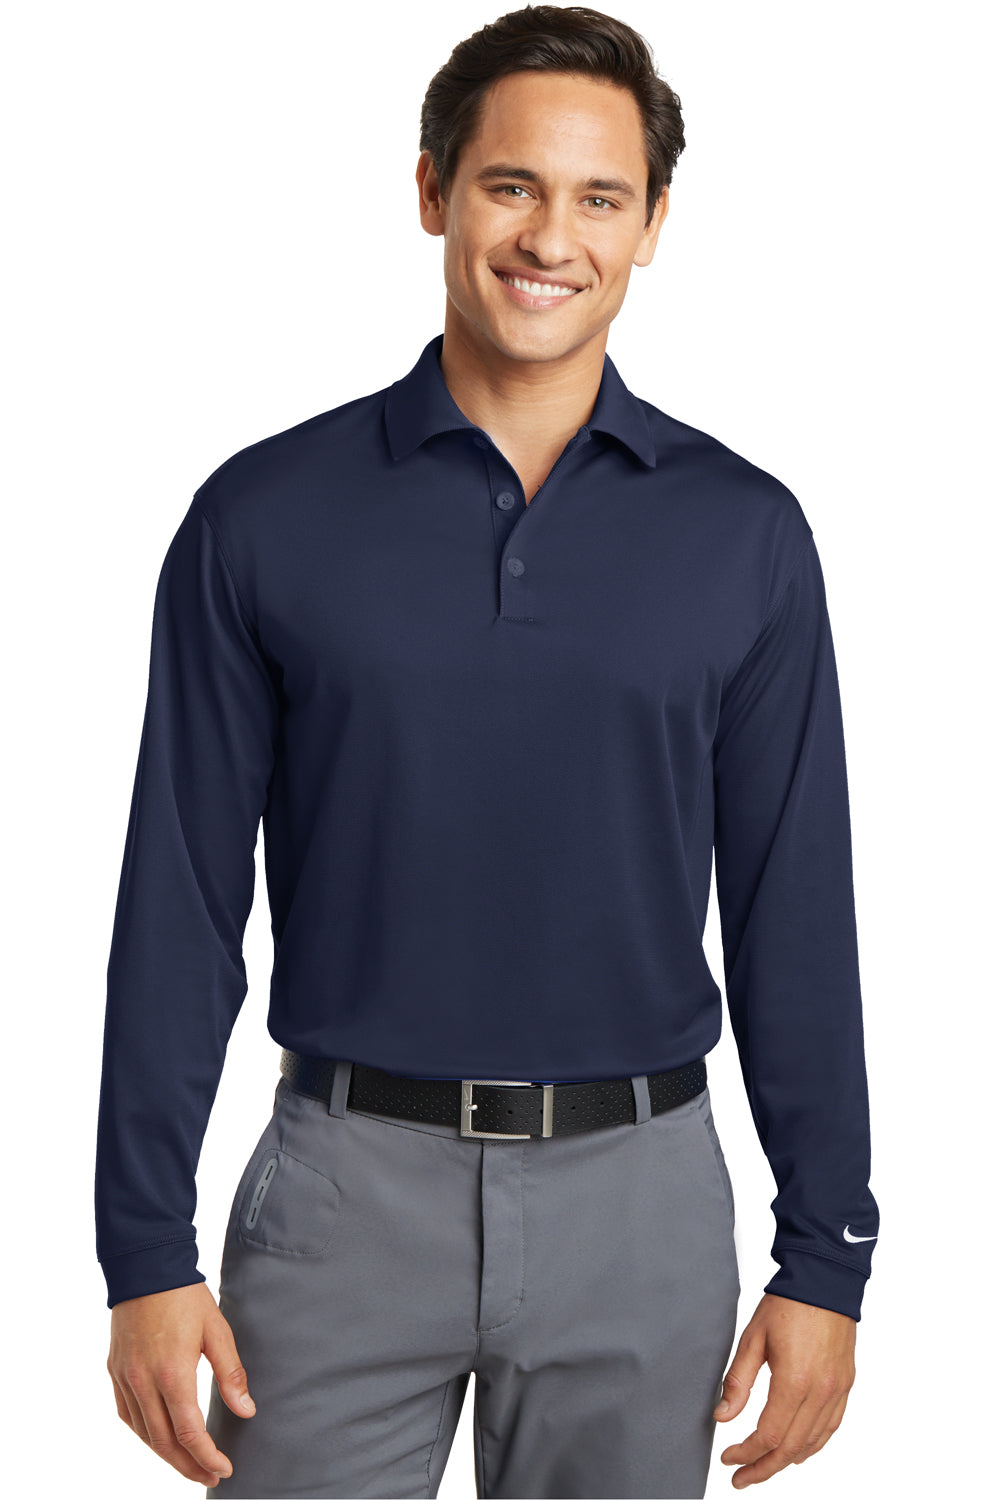 Nike 466364/604940 Mens Stretch Tech Dri-Fit Moisture Wicking Long Sleeve Polo Shirt Midnight Navy Blue Model Front